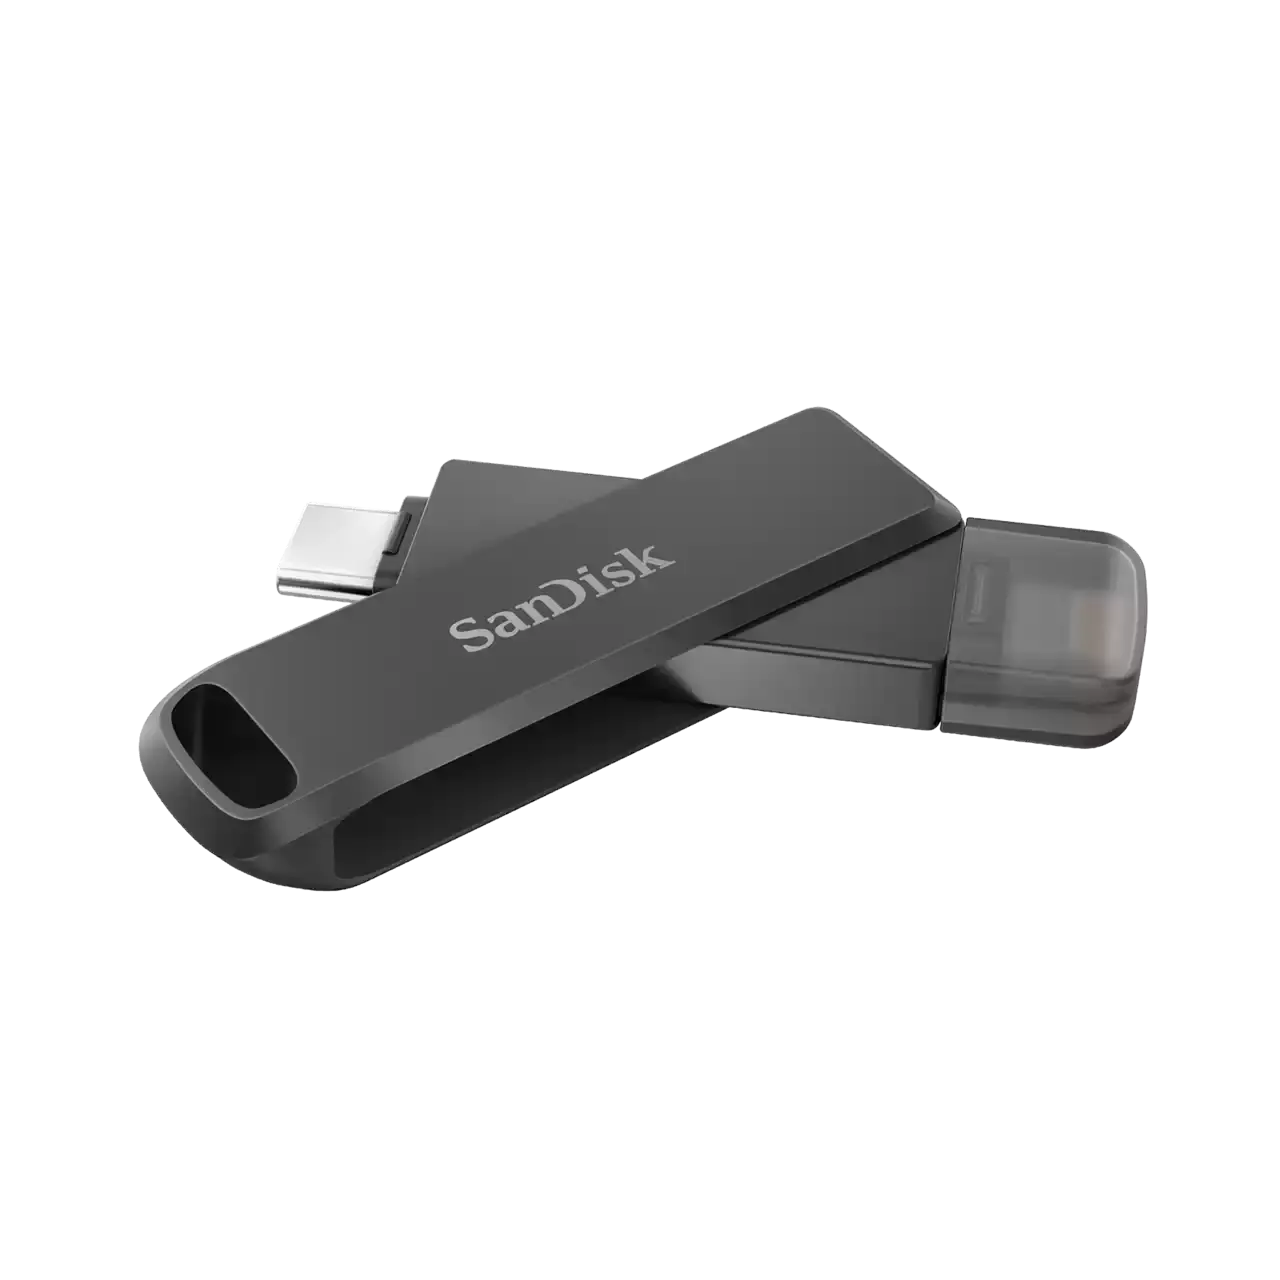 SanDisk iXpand Flash Drive Luxe Flash Drive for iPhone